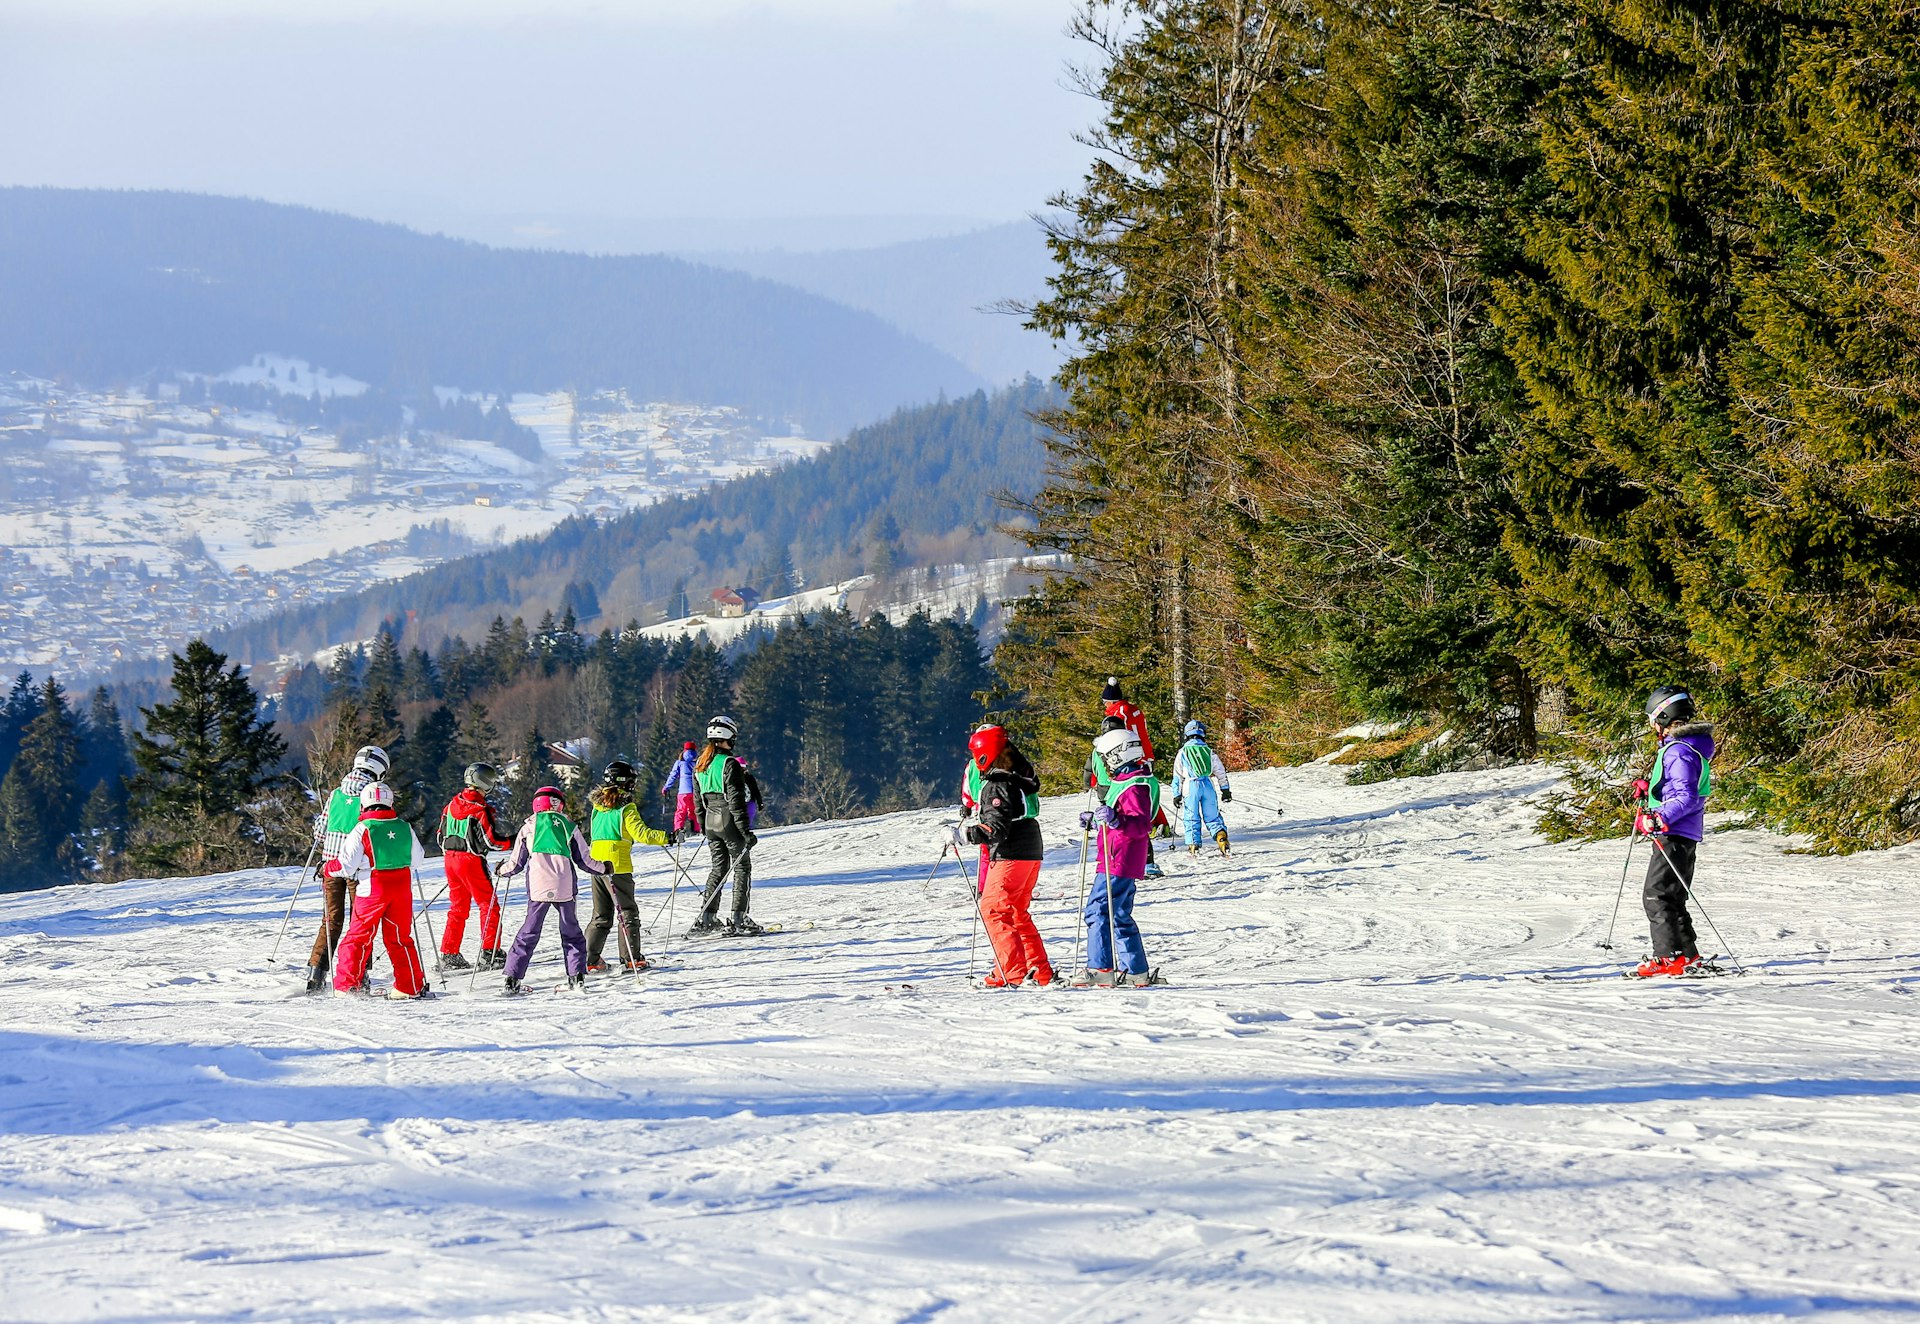 A group of children in full ski gear are led out by an instructor on the snow-covered slopes